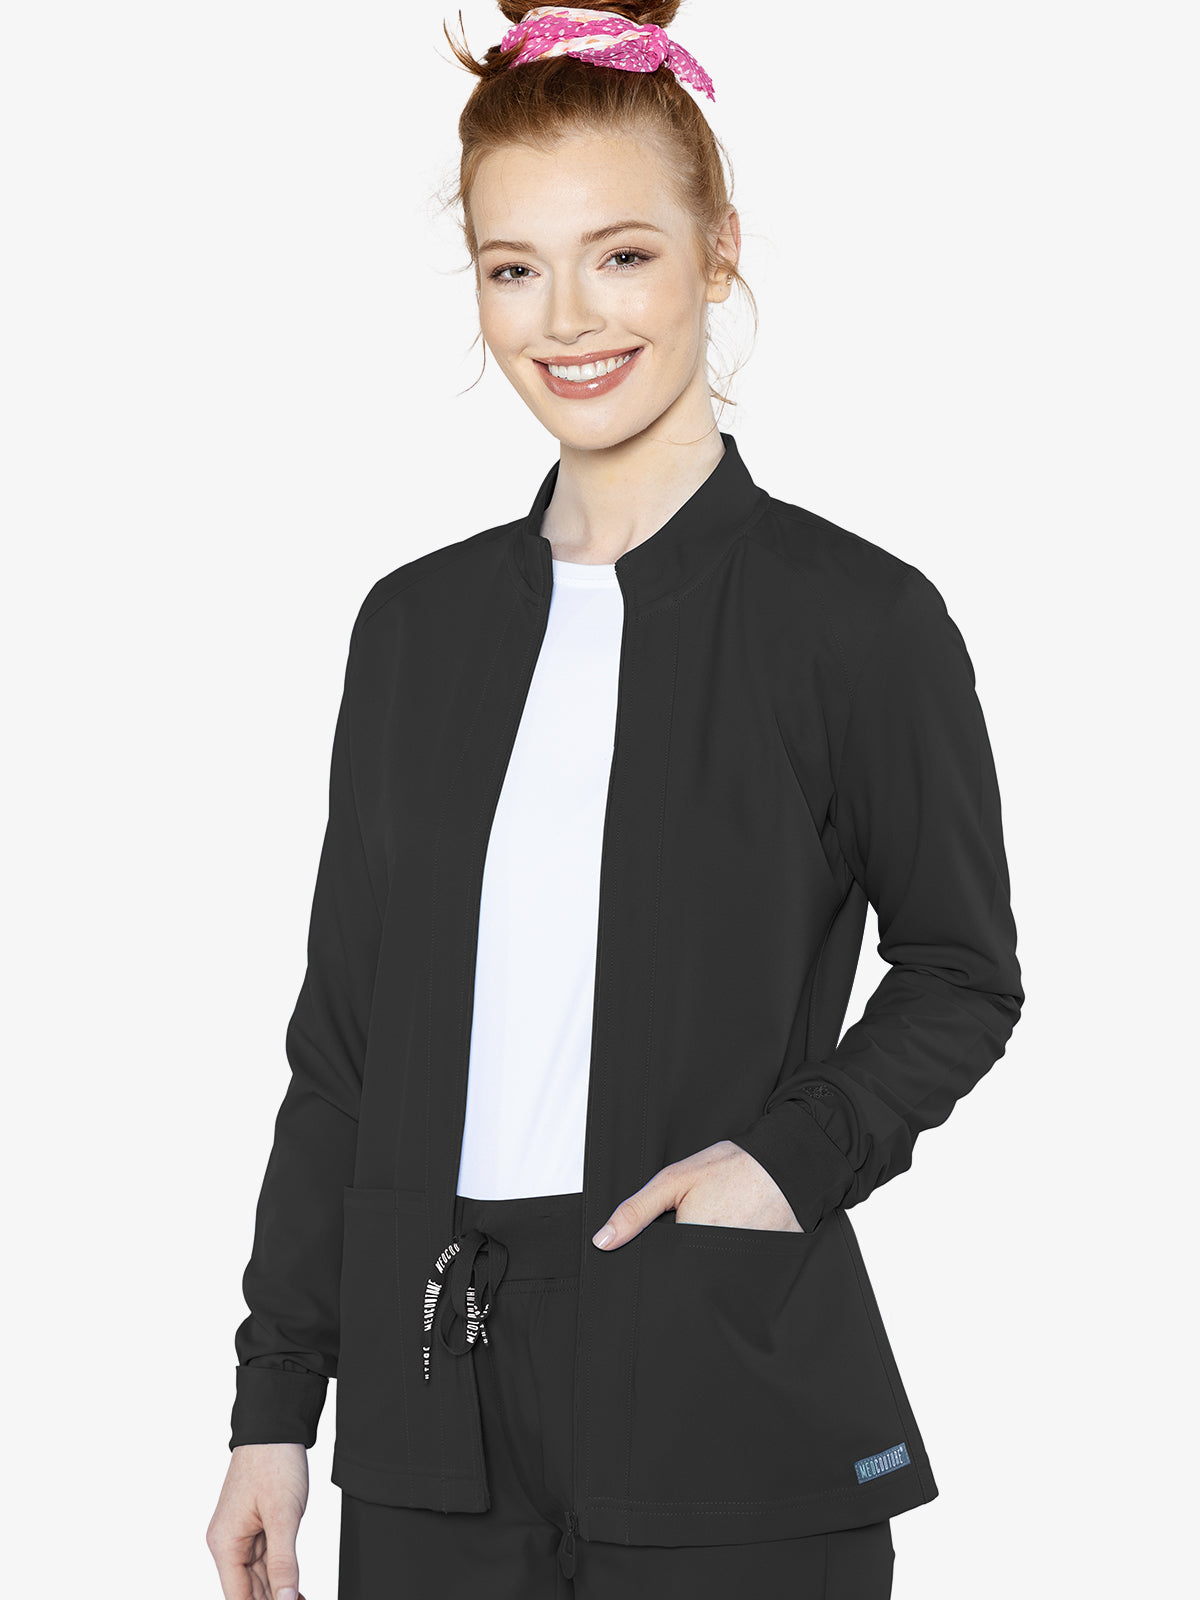 Med Couture 2660 Insight Women's Zip Front Warmup Jacket Black